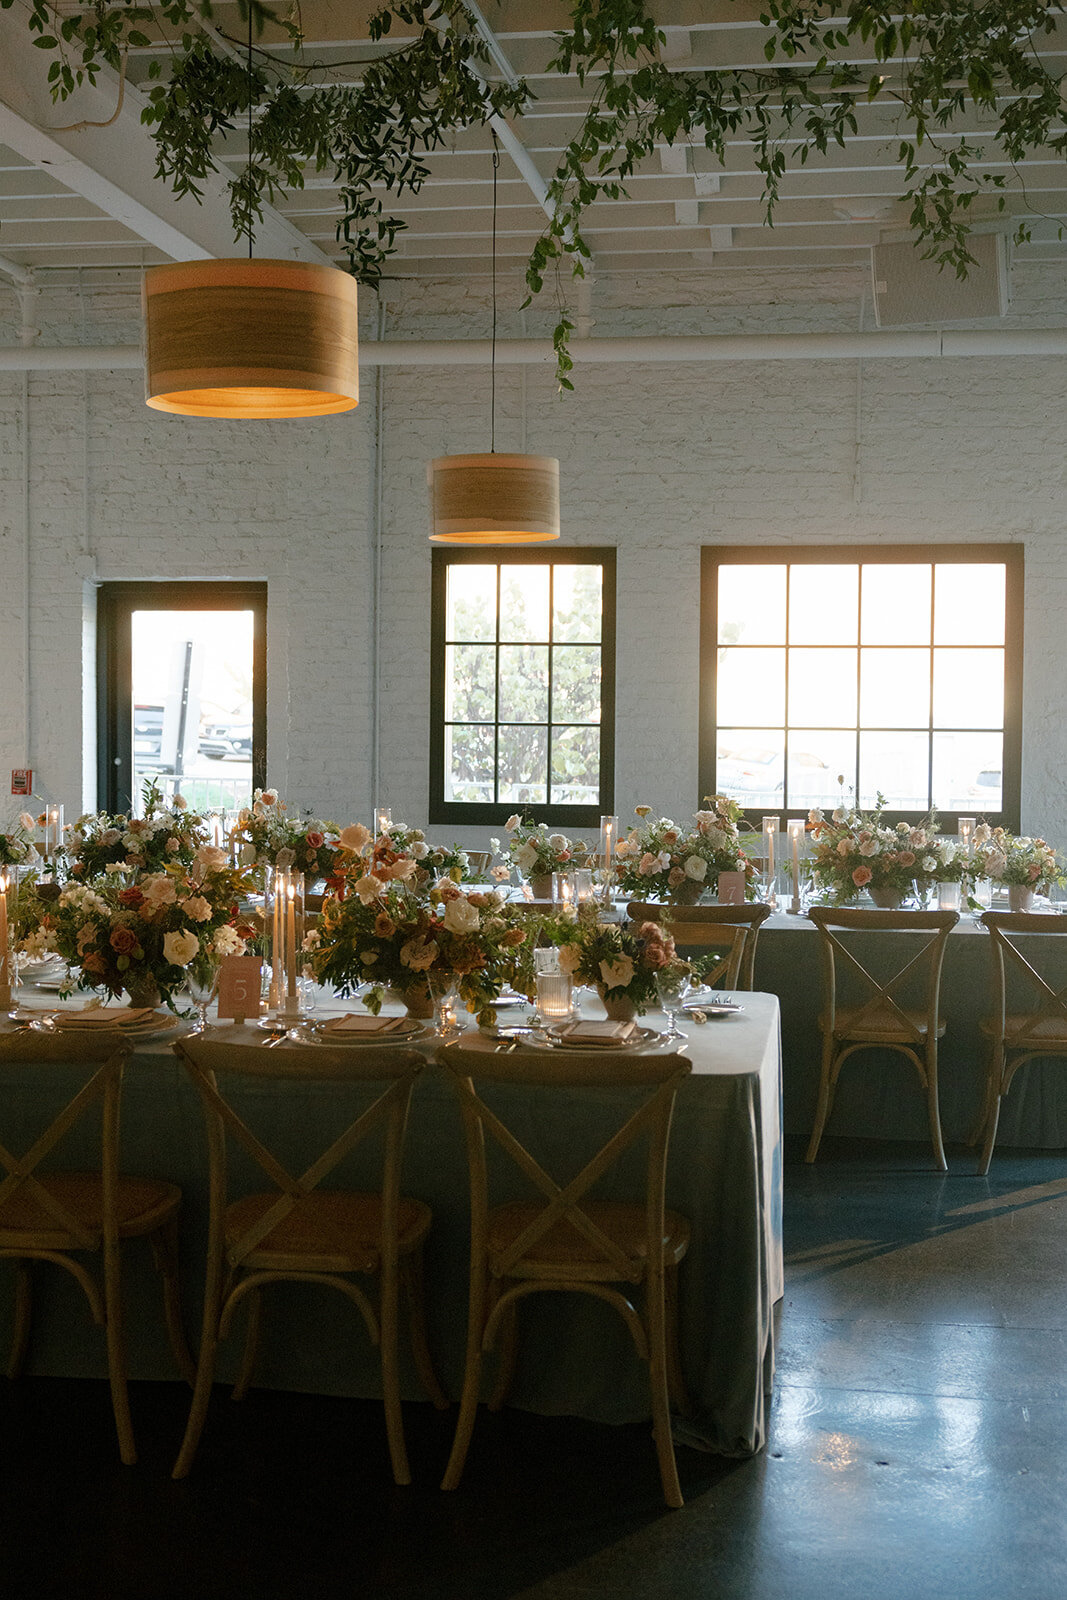 Fall wedding in Raleigh, NC highlights the beautiful autumnal setting in the Carolinas. Floral colors of copper, terra cotta, dusty pink, mauve, dusty blue, taupe, cream, and natural green. Flowers consisting of roses, dahlias, ranunculus, thistle, rain tree pods, and fall branches. Design by Rosemary and Finch Floral Design based in Nashville, TN.